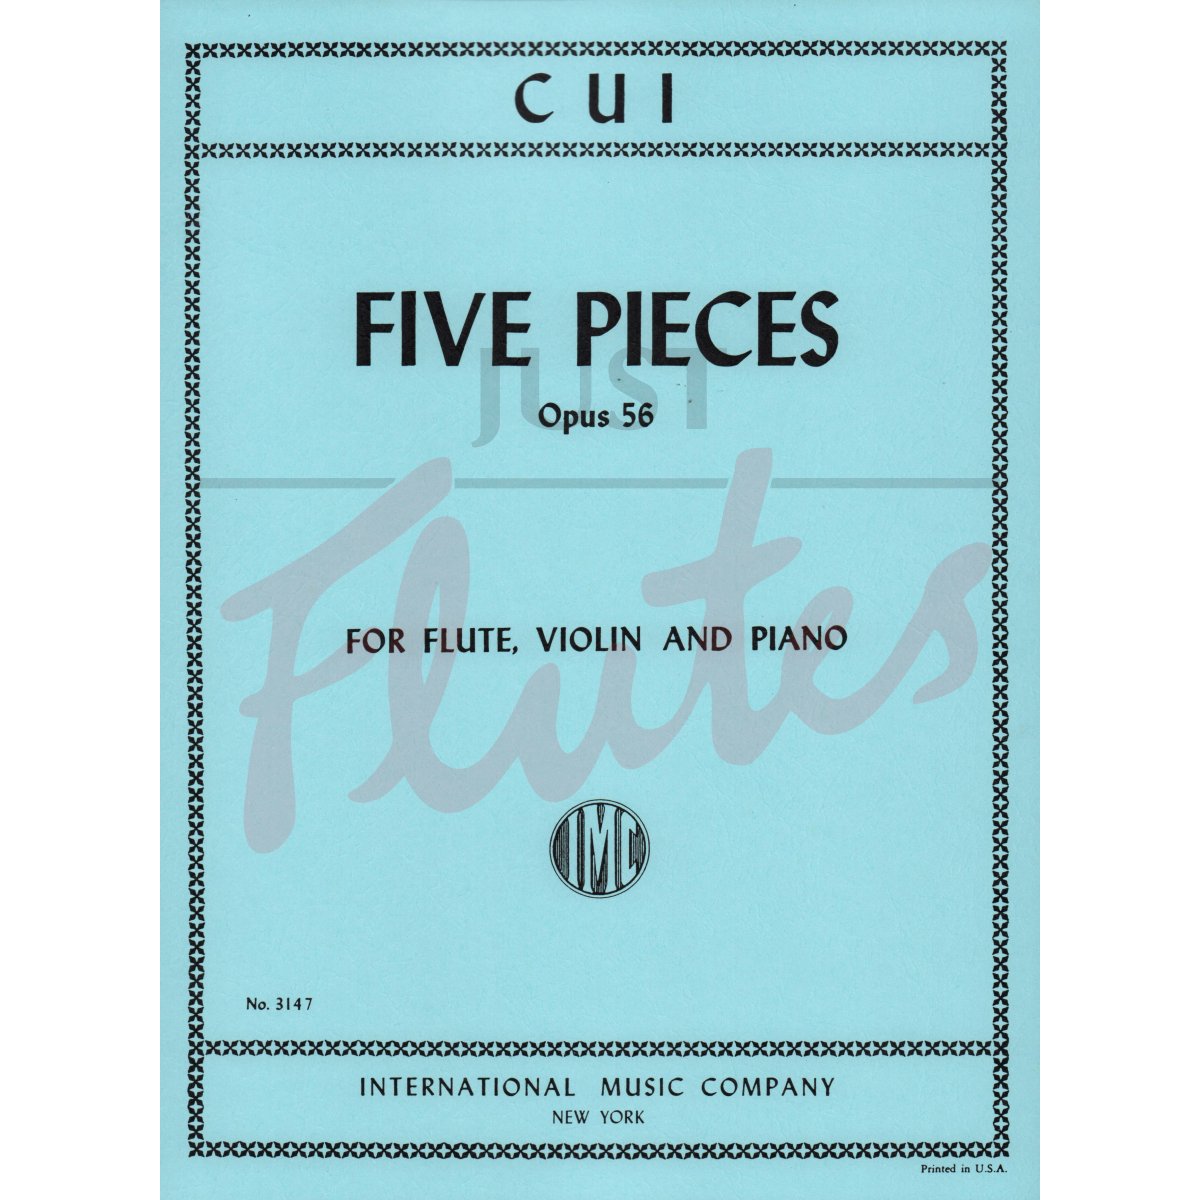 Five Pieces for Flute, Violin and Piano